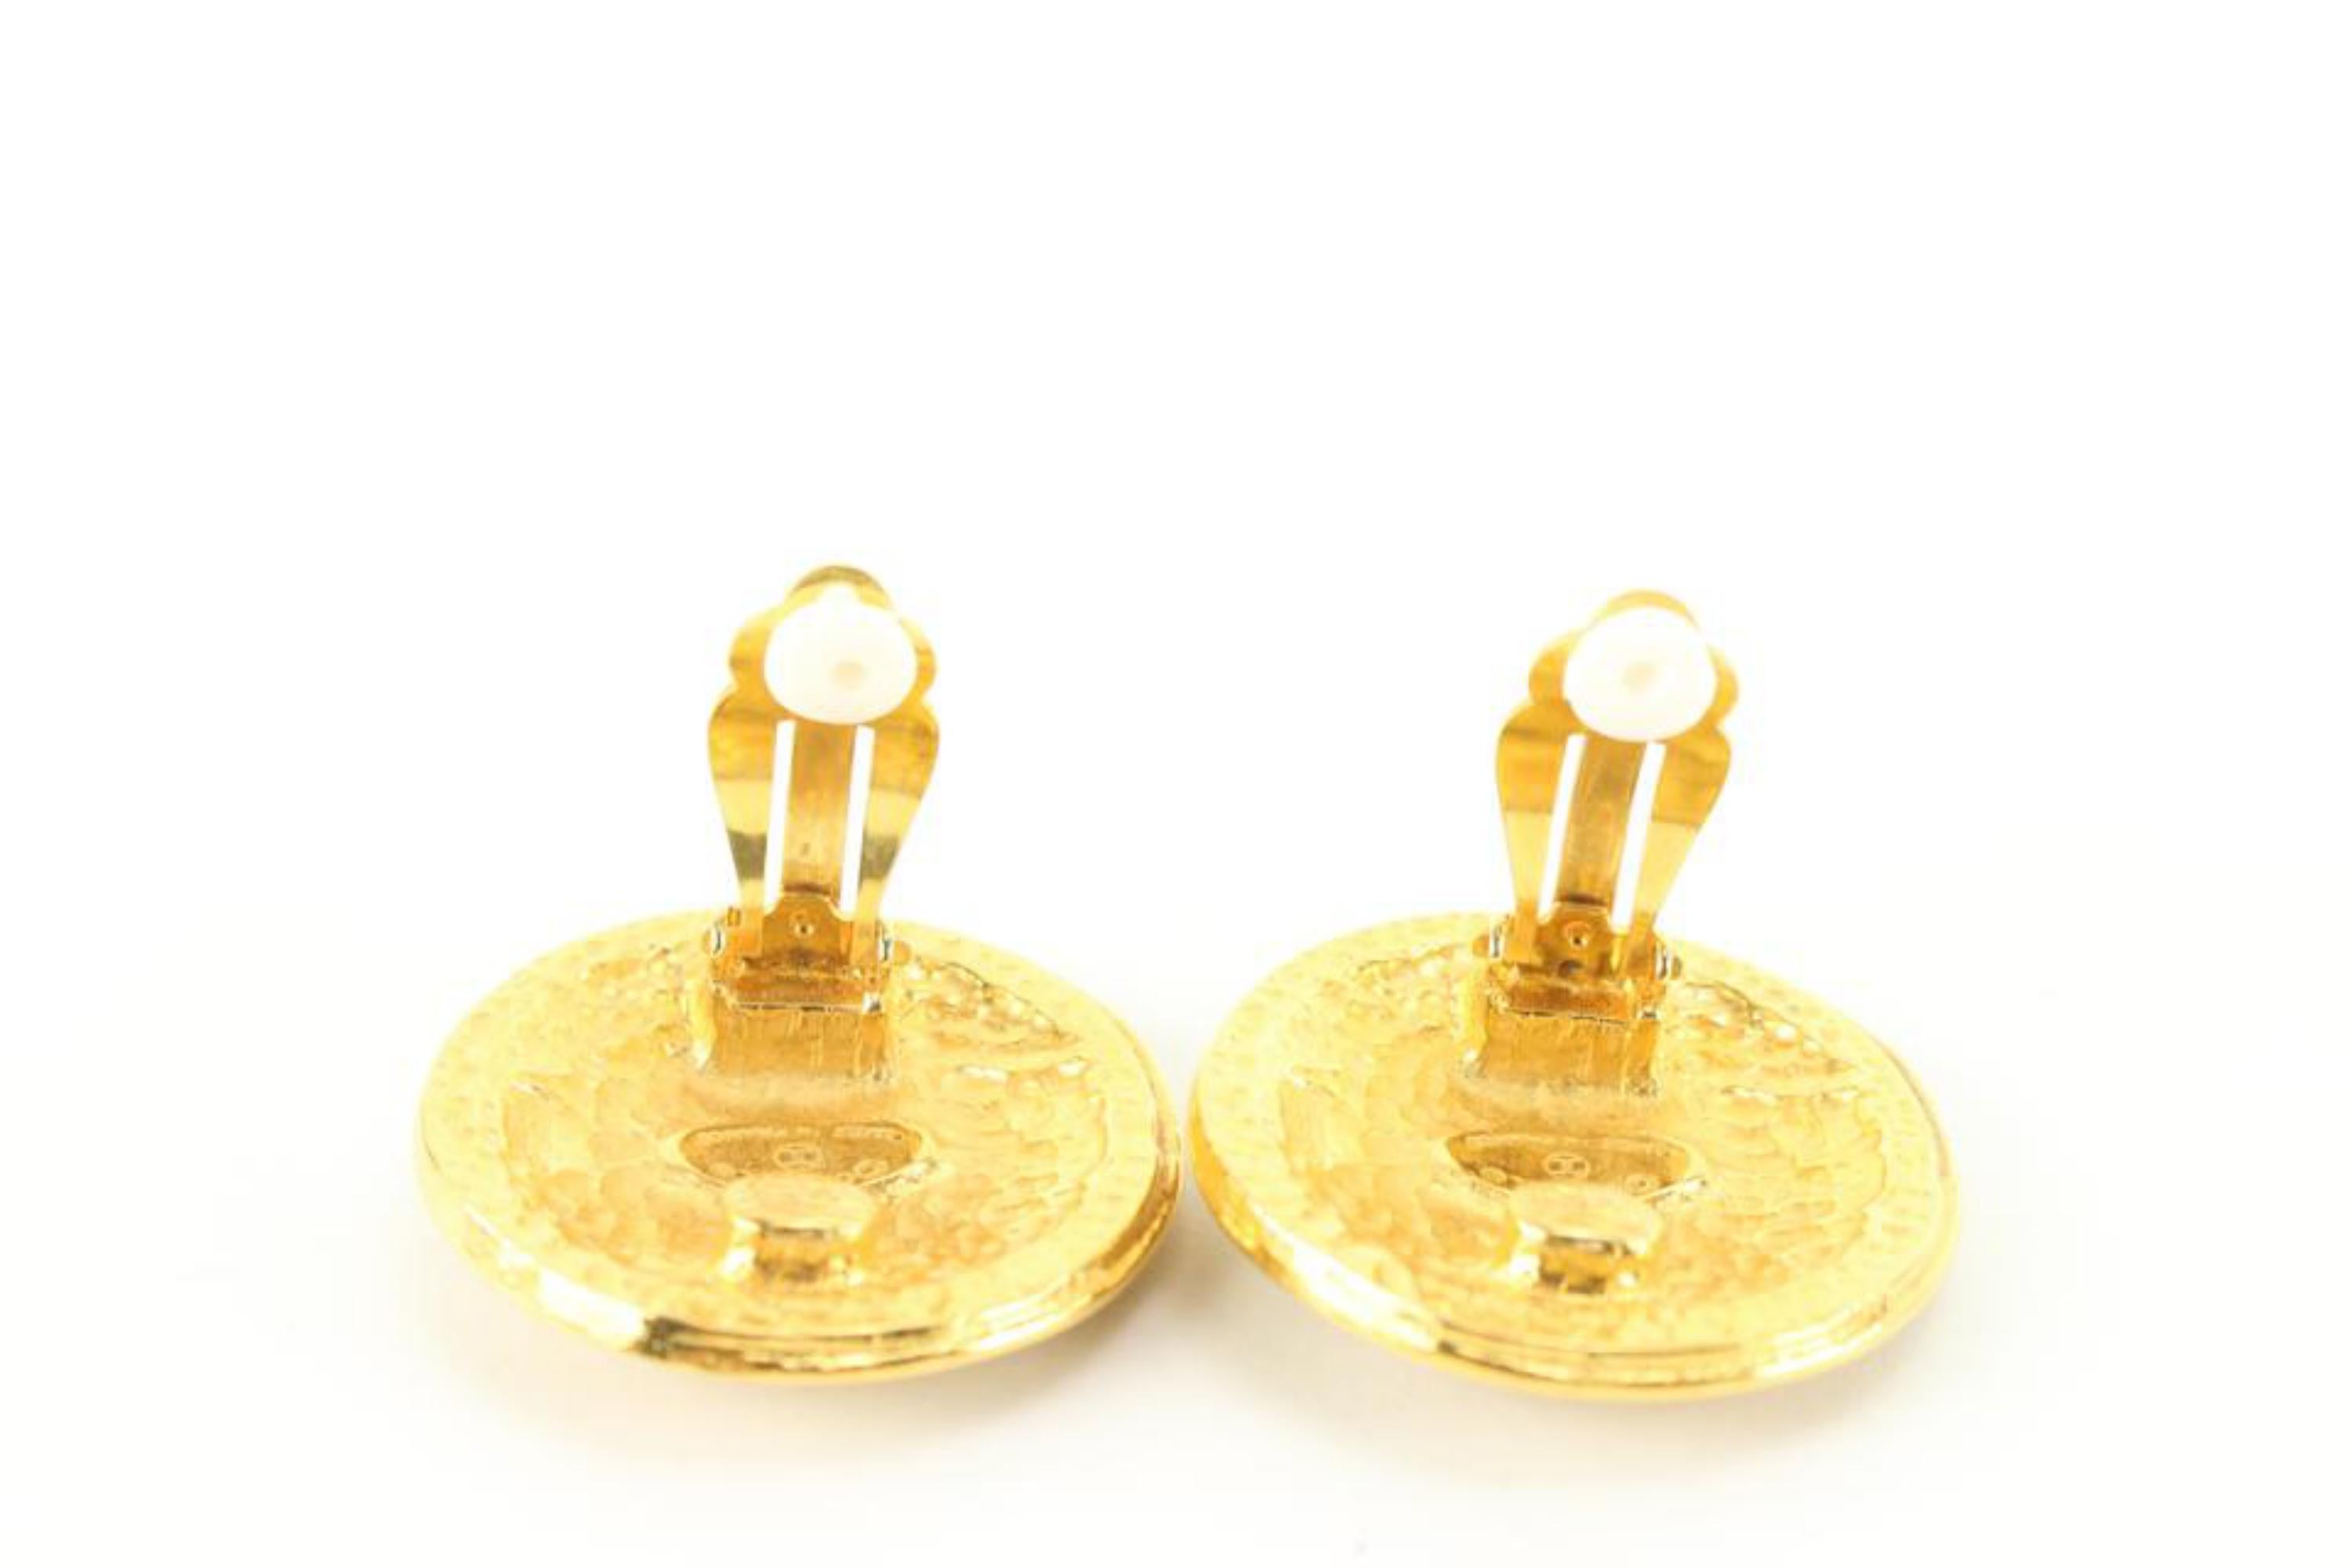 Chanel 24k Gold Plated CC Logo Around Crest Shield Earrings 25cc824s 2